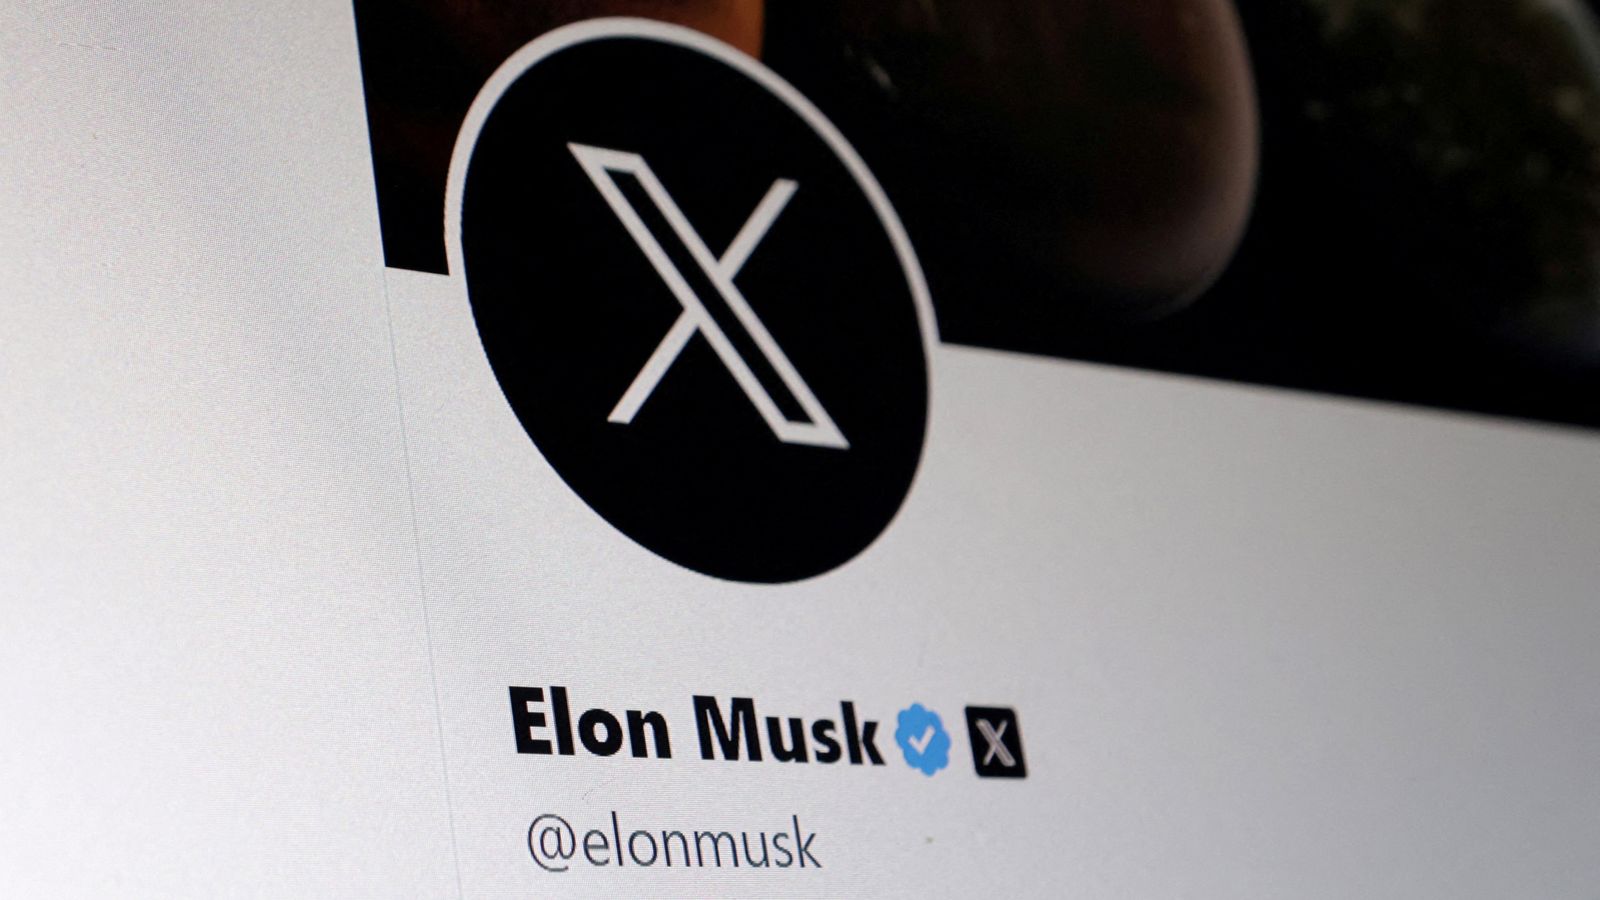 Disney and Warner Bros pull ads from X after Elon Musk apparently endorses antisemitic conspiracy theory 